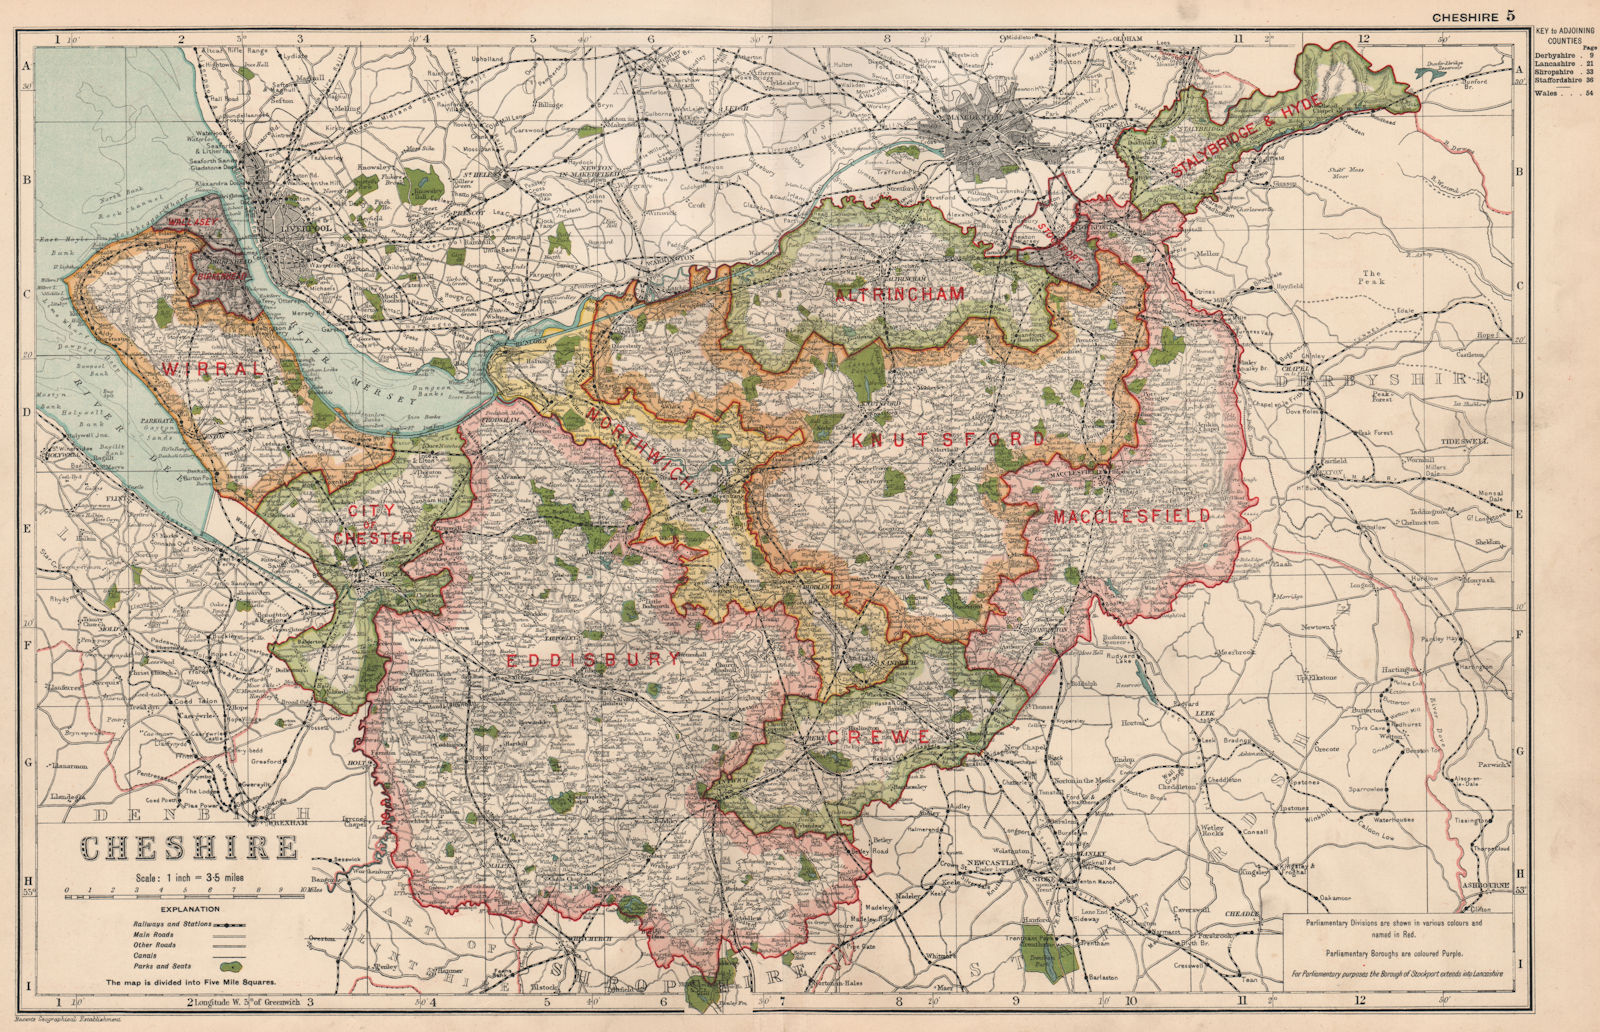 CHESHIRE. Showing Parliamentary divisions, boroughs & parks. BACON 1936 map